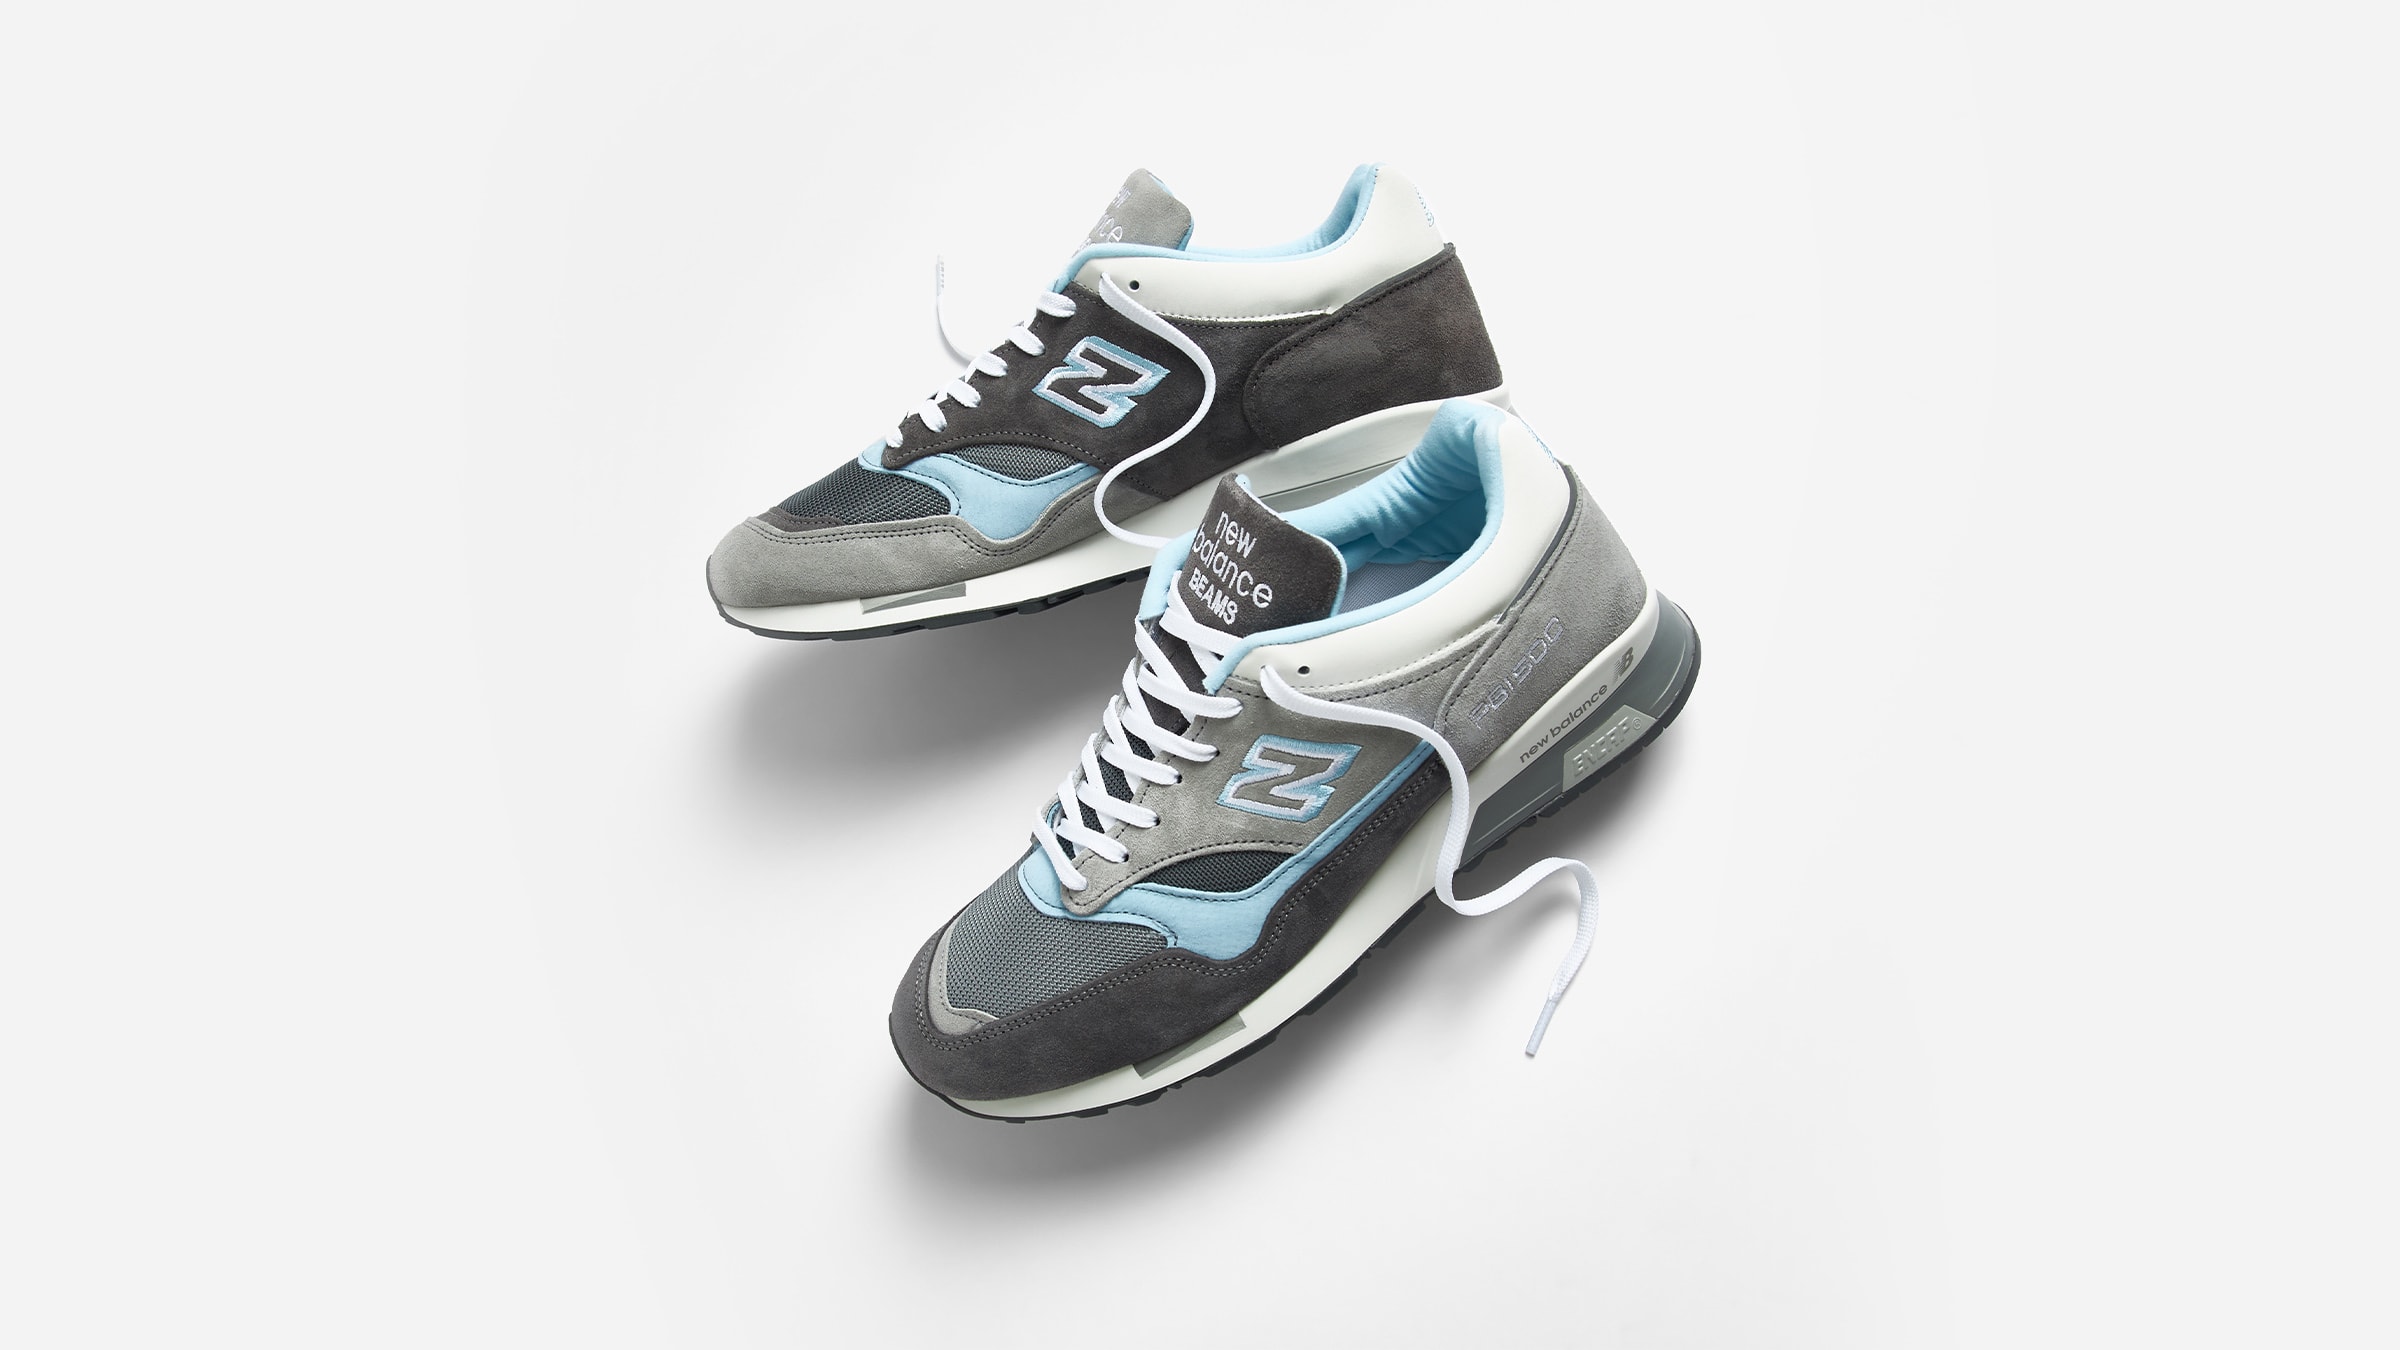 New Balance x Beams x Paperboy M1500BMS (Grey) | END. Launches